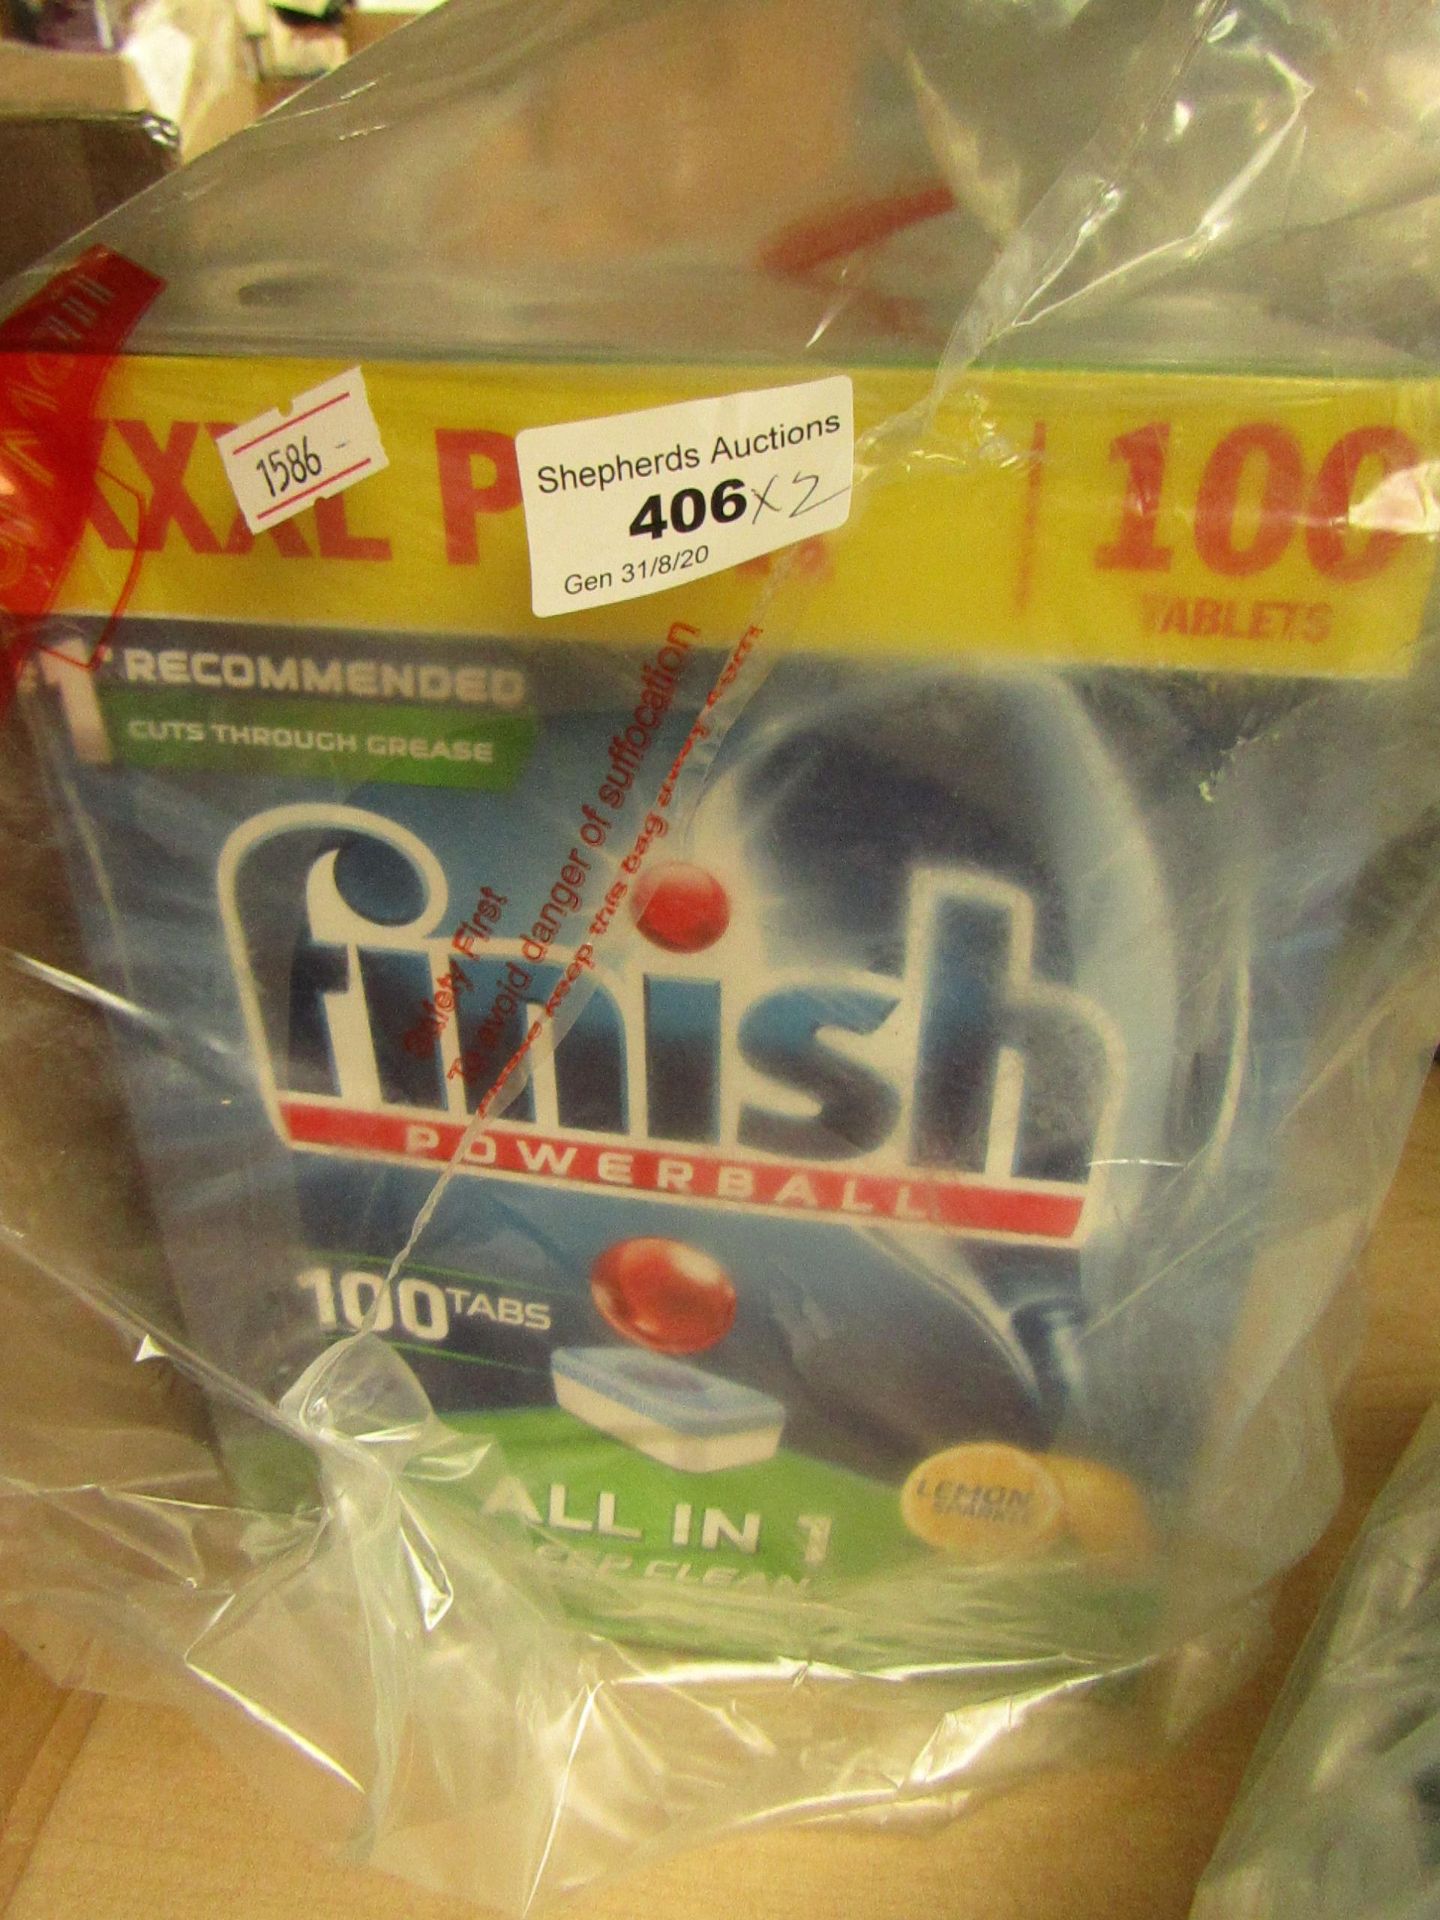 2x Finish - PowerBall Dishwasher Tablets (100 Tabs) XXXL Pack (Lemon Sparkle Scented) - Boxes May Be